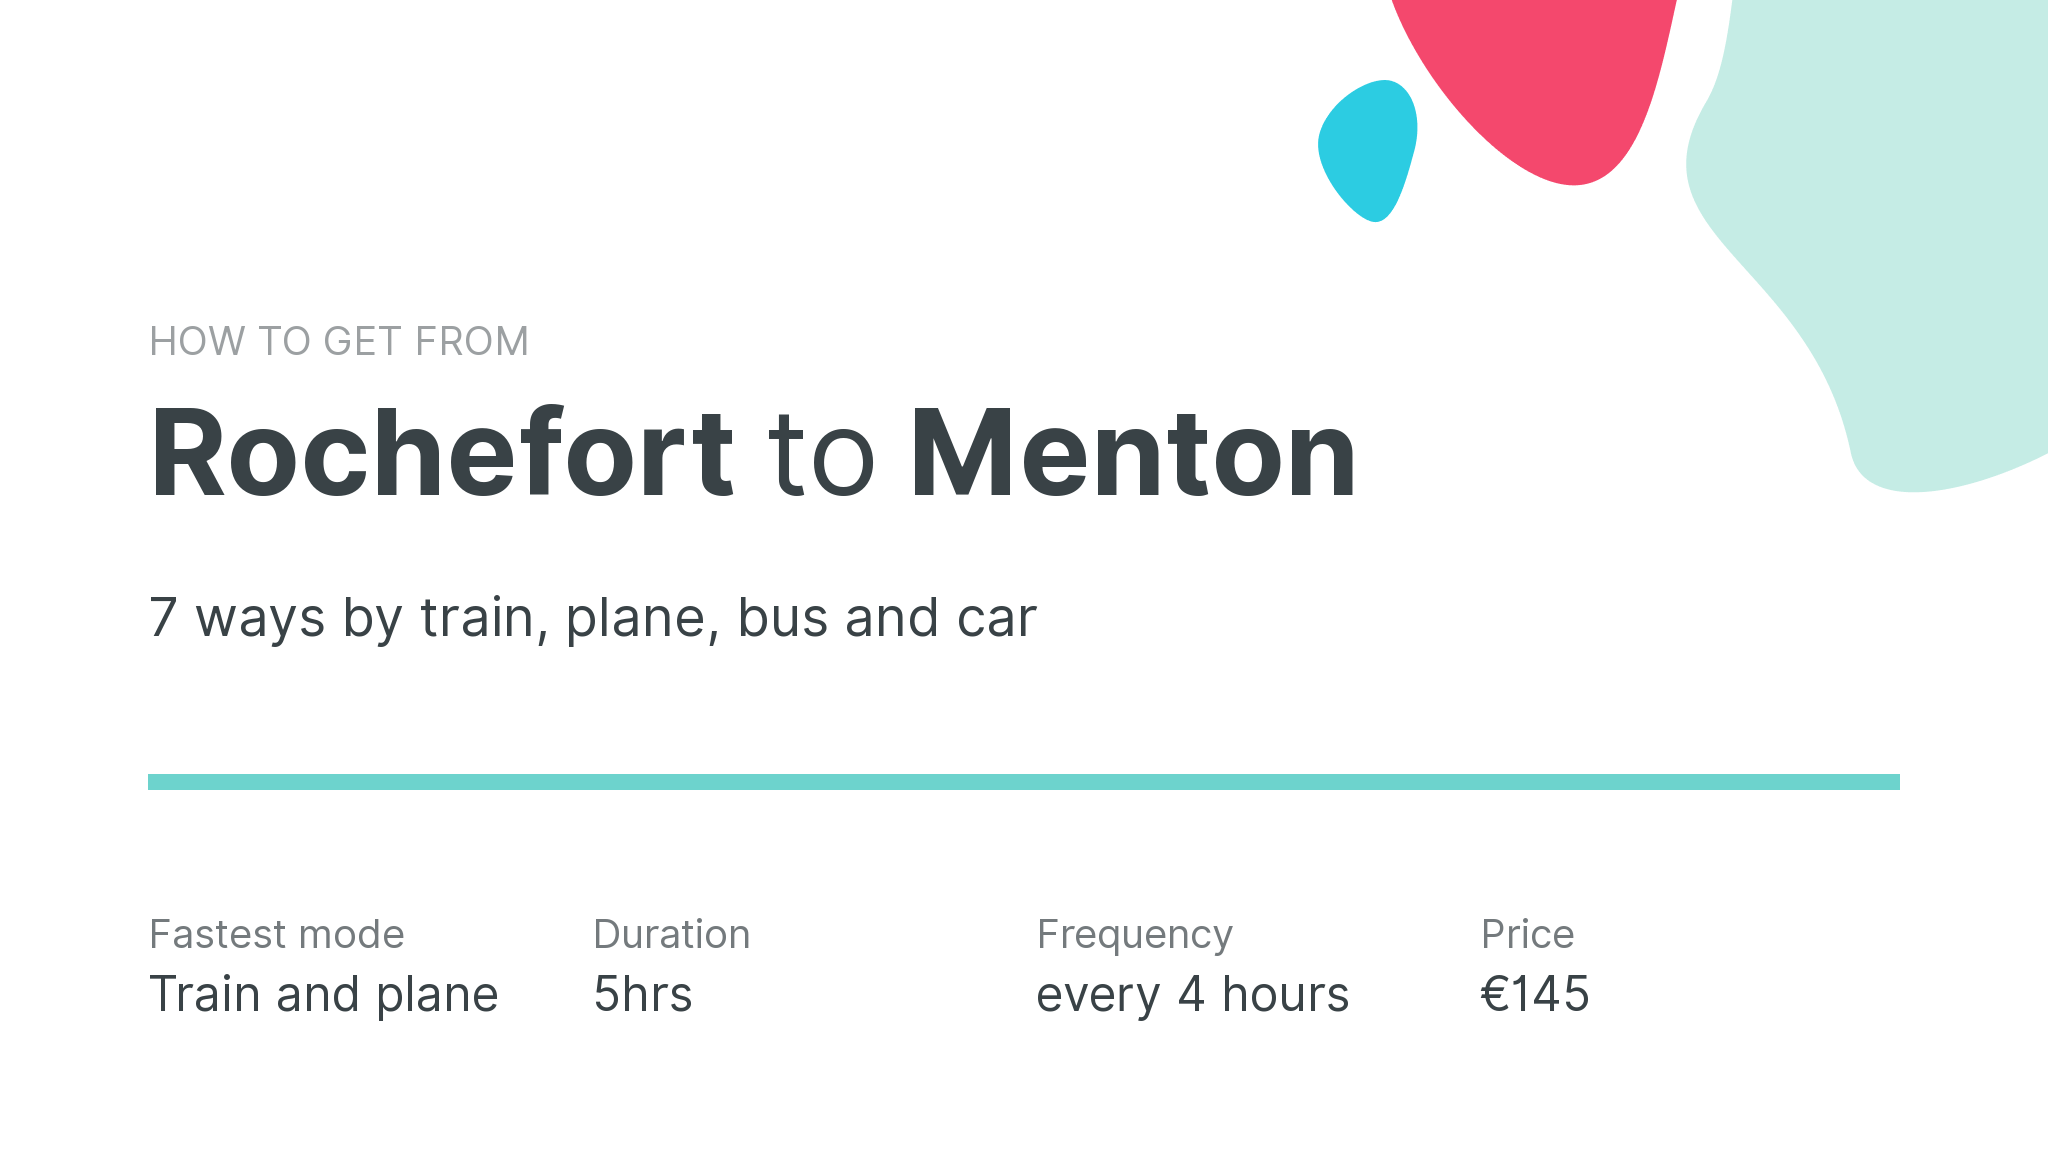 How do I get from Rochefort to Menton